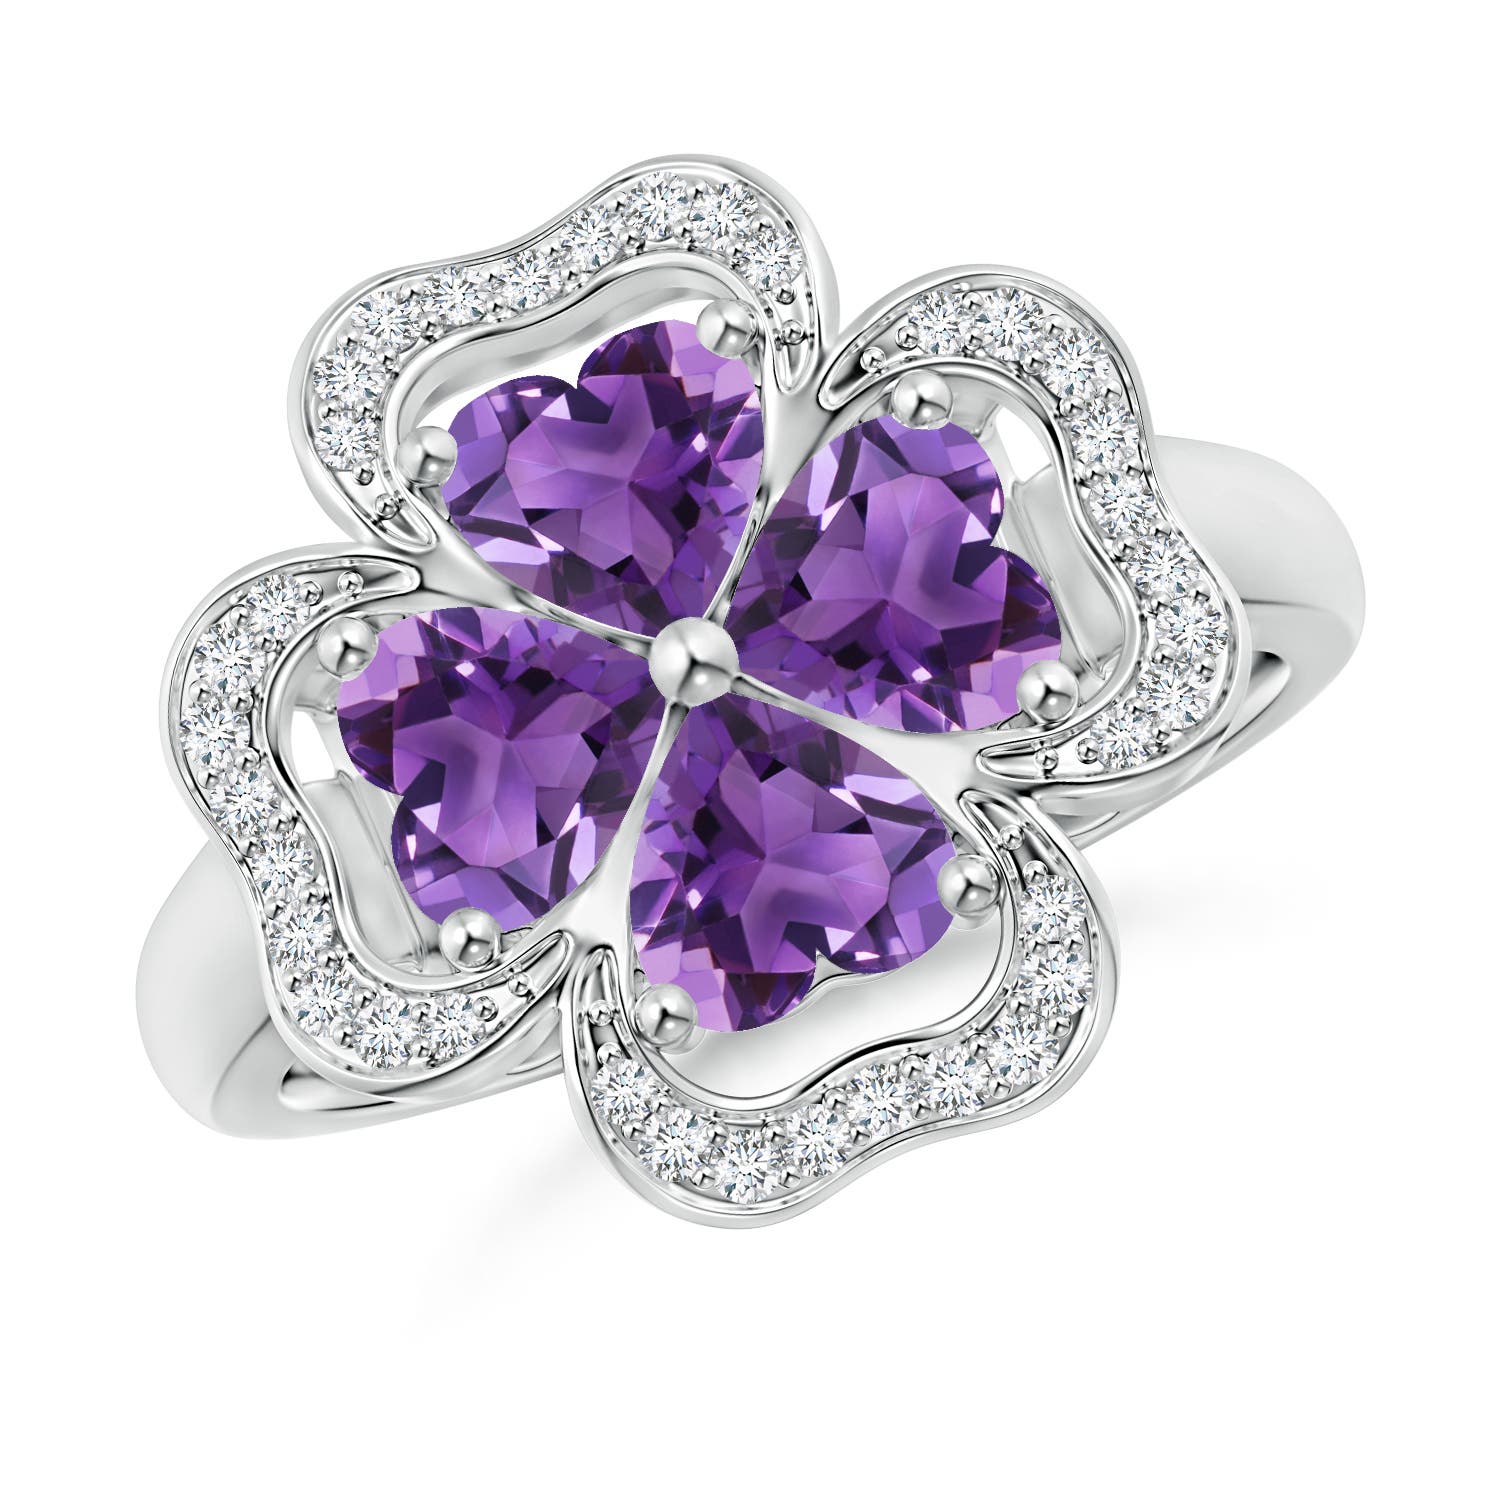 AAA - Amethyst / 1.57 CT / 14 KT White Gold